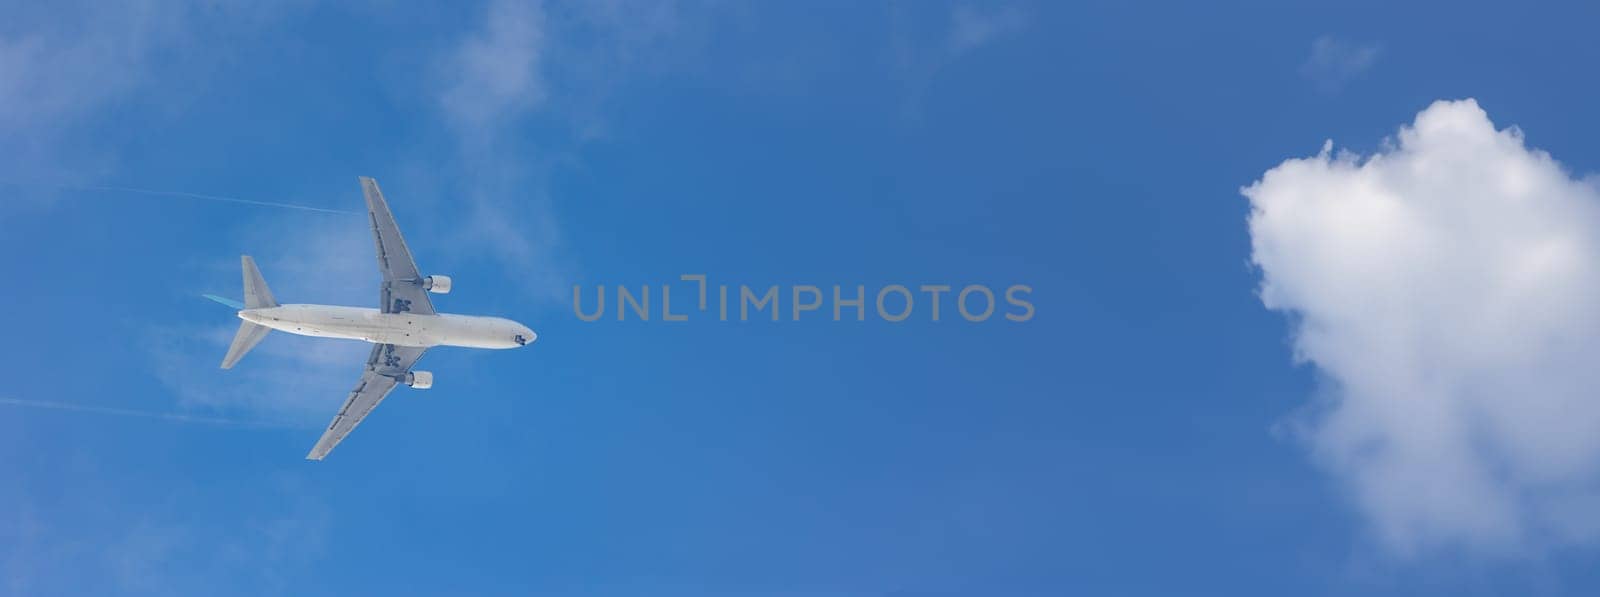 An Airplane Soaring Through the Vast Blue Sky by Studia72